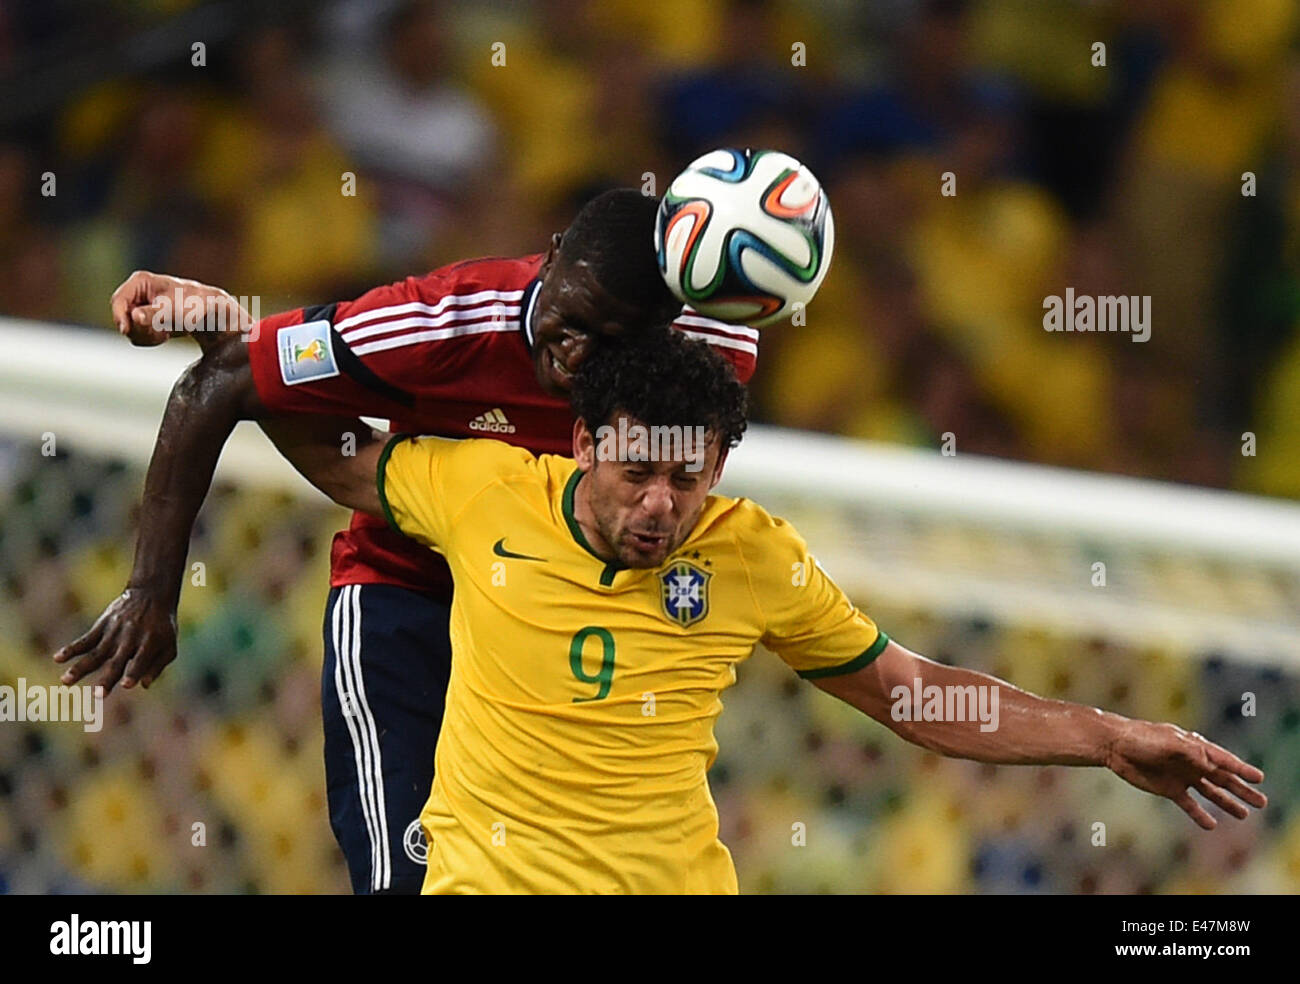 Fortaleza, Brazil. 04th July, 2014. Fred of Brazil and Pablo Armero (back) of Colombia vie for the ball during the FIFA World Cup 2014 quarter final match soccer between Brazil and Colombia at the Estadio Castelao in Fortaleza, Brazil, 04 July 2014. Photo: Marius Becker/dpa/Alamy Live News Stock Photo